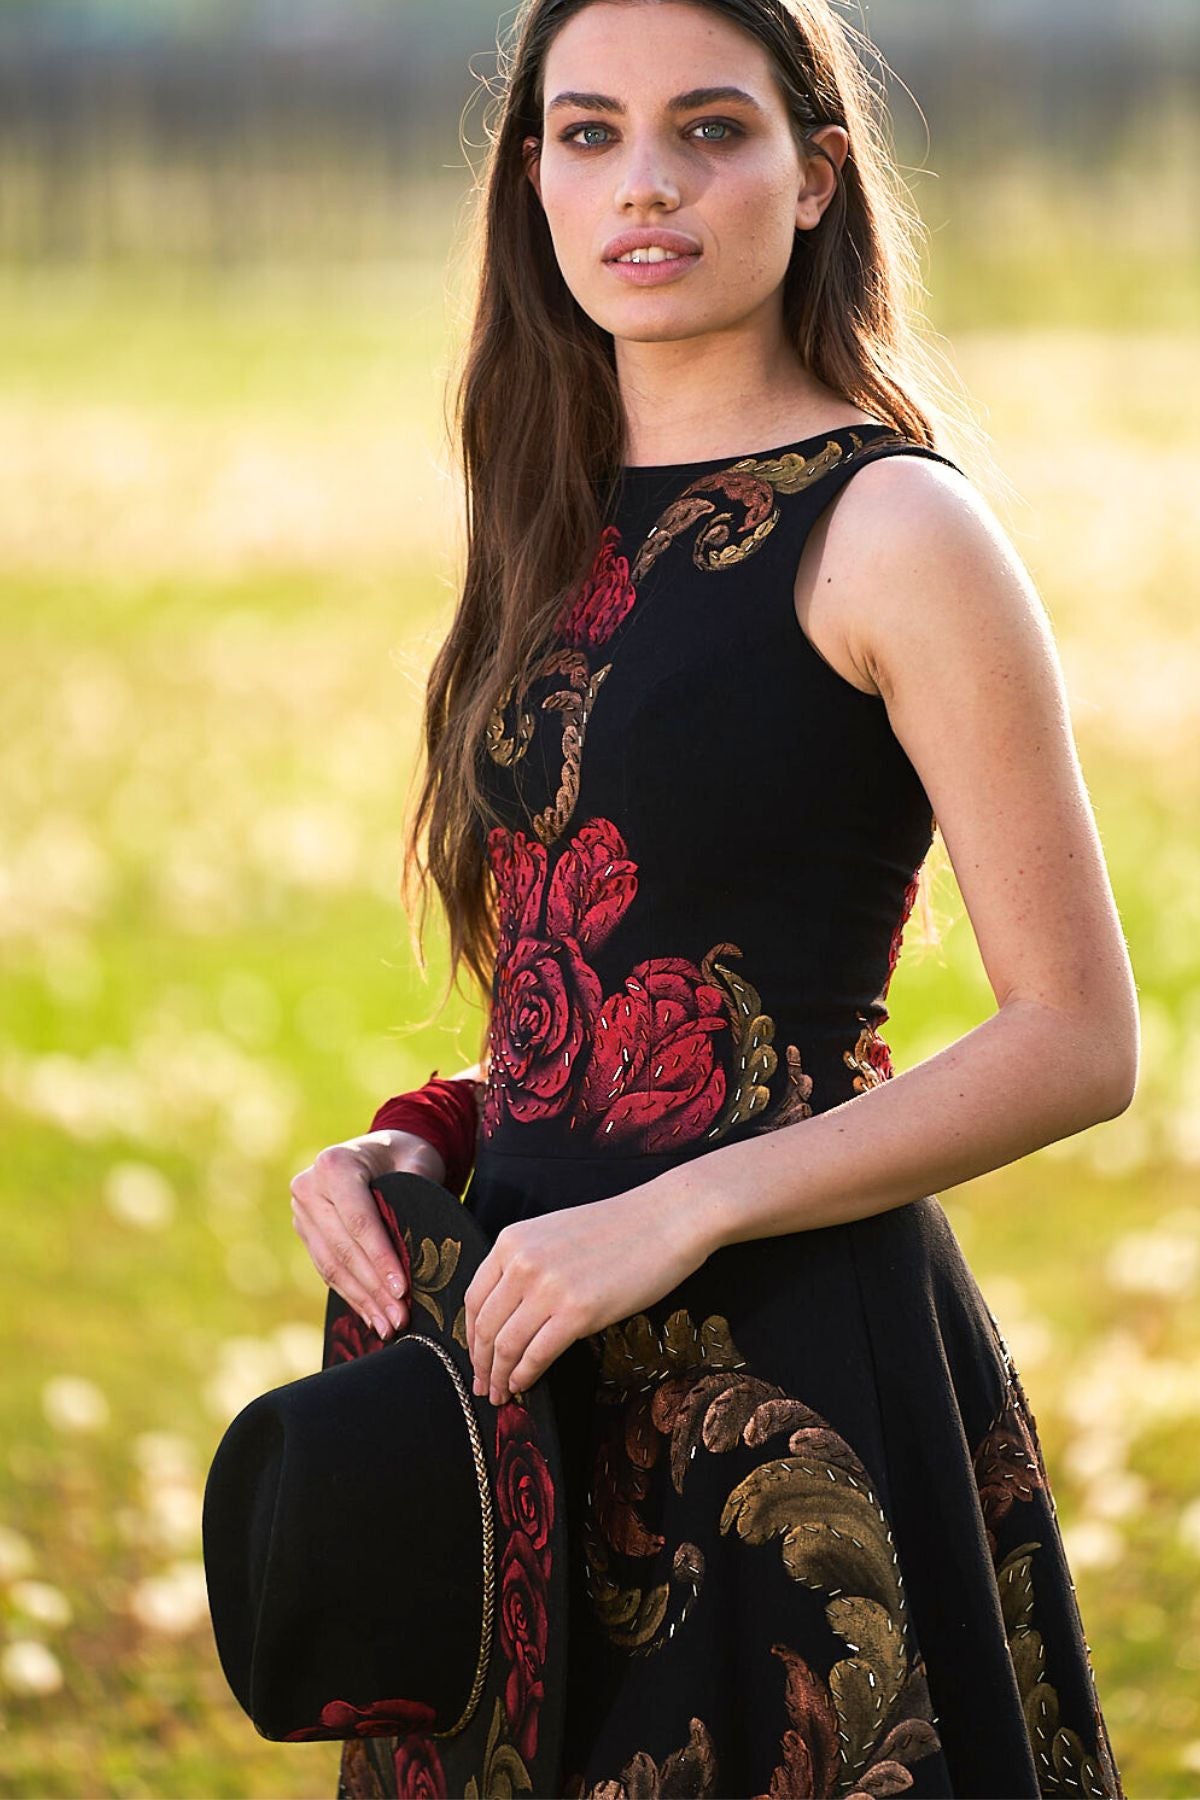 HAND-PAINTED AND HAND-EMBROIDERED MIDI DRESS - ROSAS ROJAS